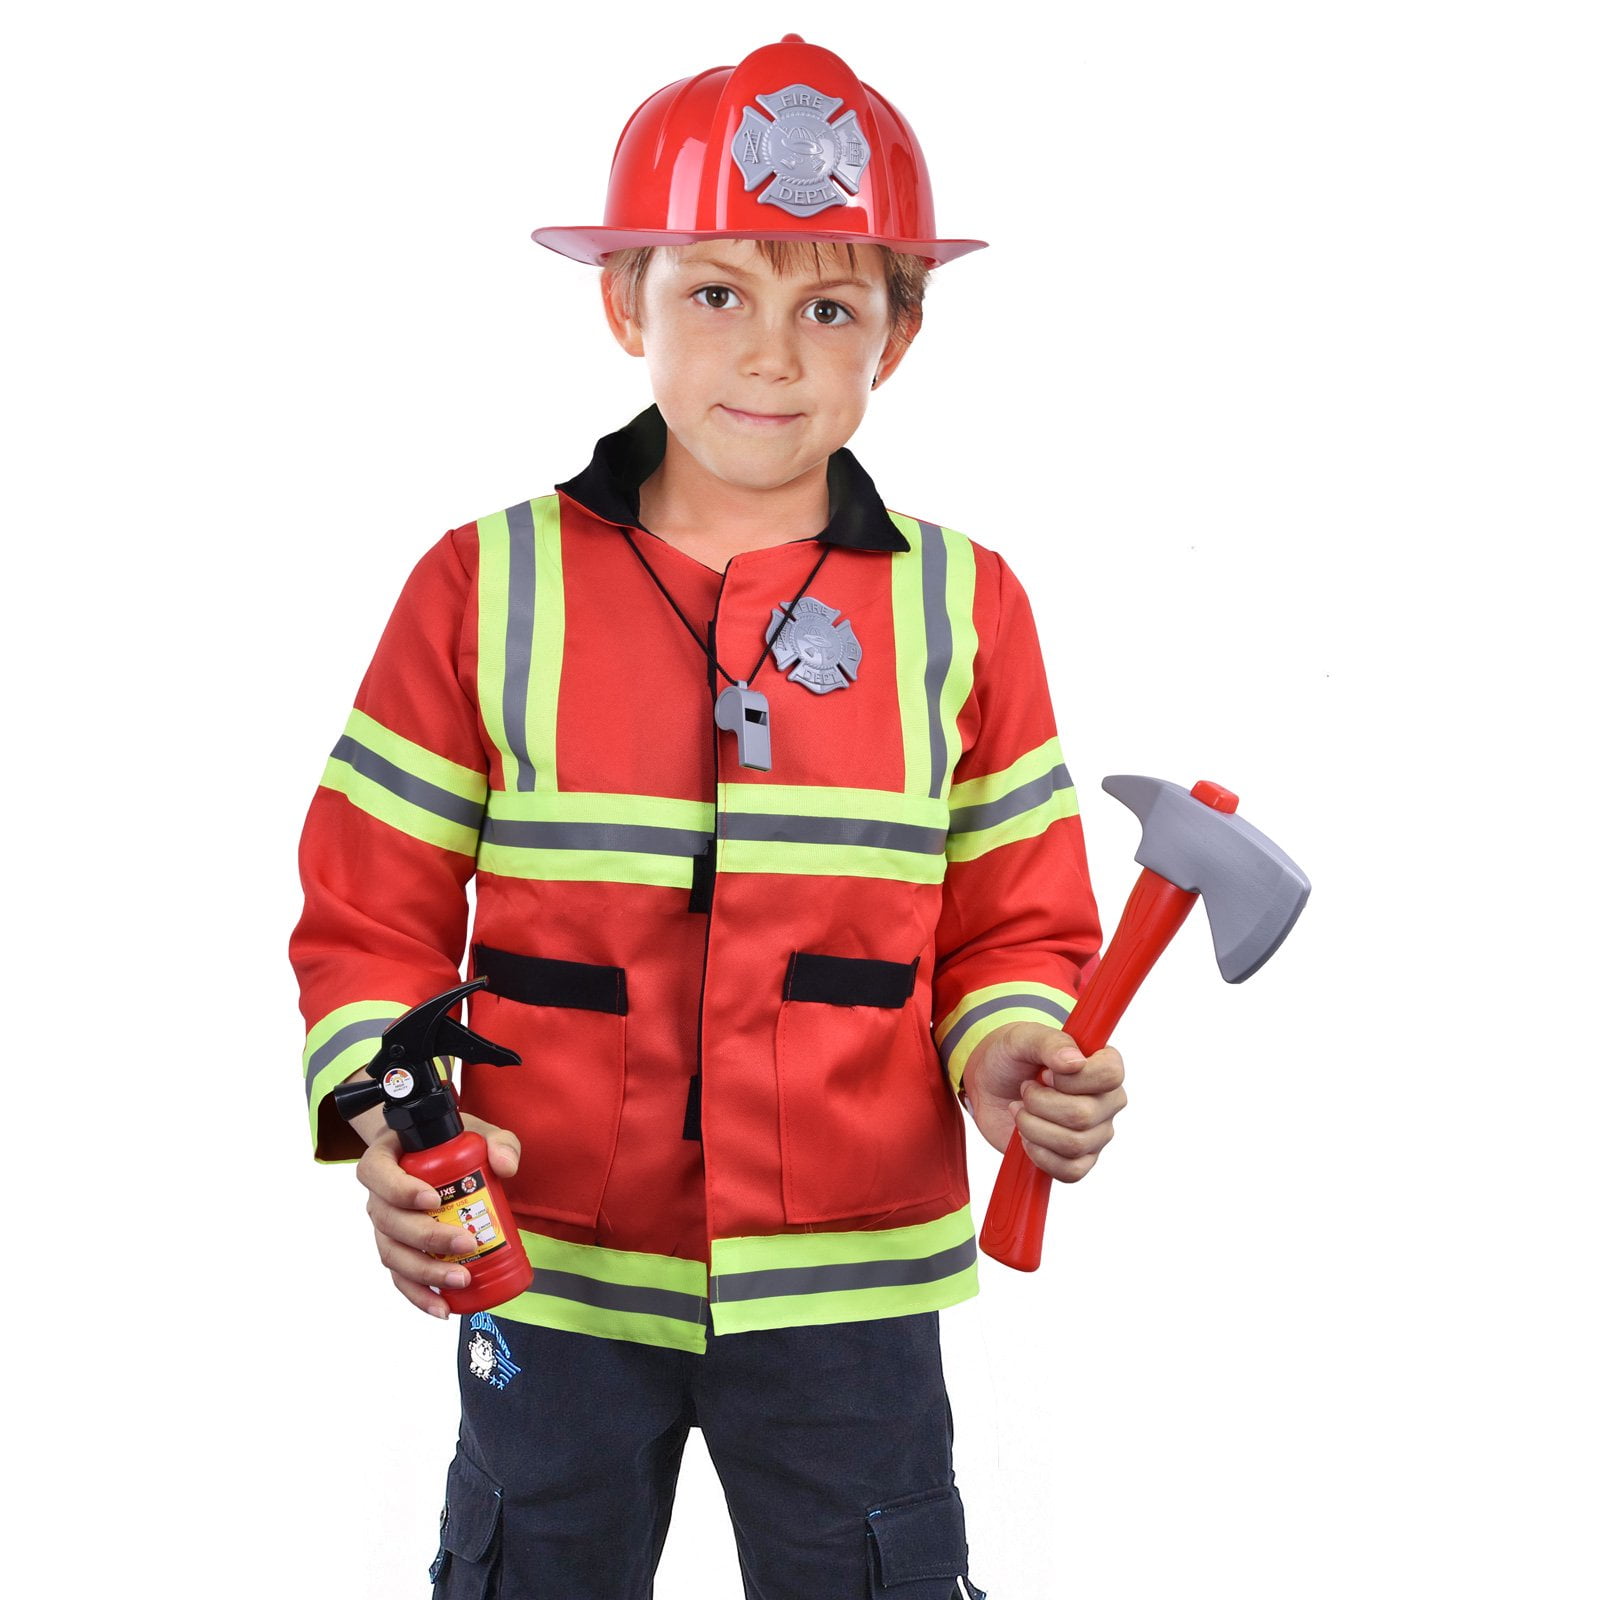 Pretend Role Play Firefighter Gifts for 3 4 iPlay Halloween Fireman Dress Up Set 6 Year Old Toddler Fire Fighter Outfit 5 iLearn Kids Fire Chief Costume 